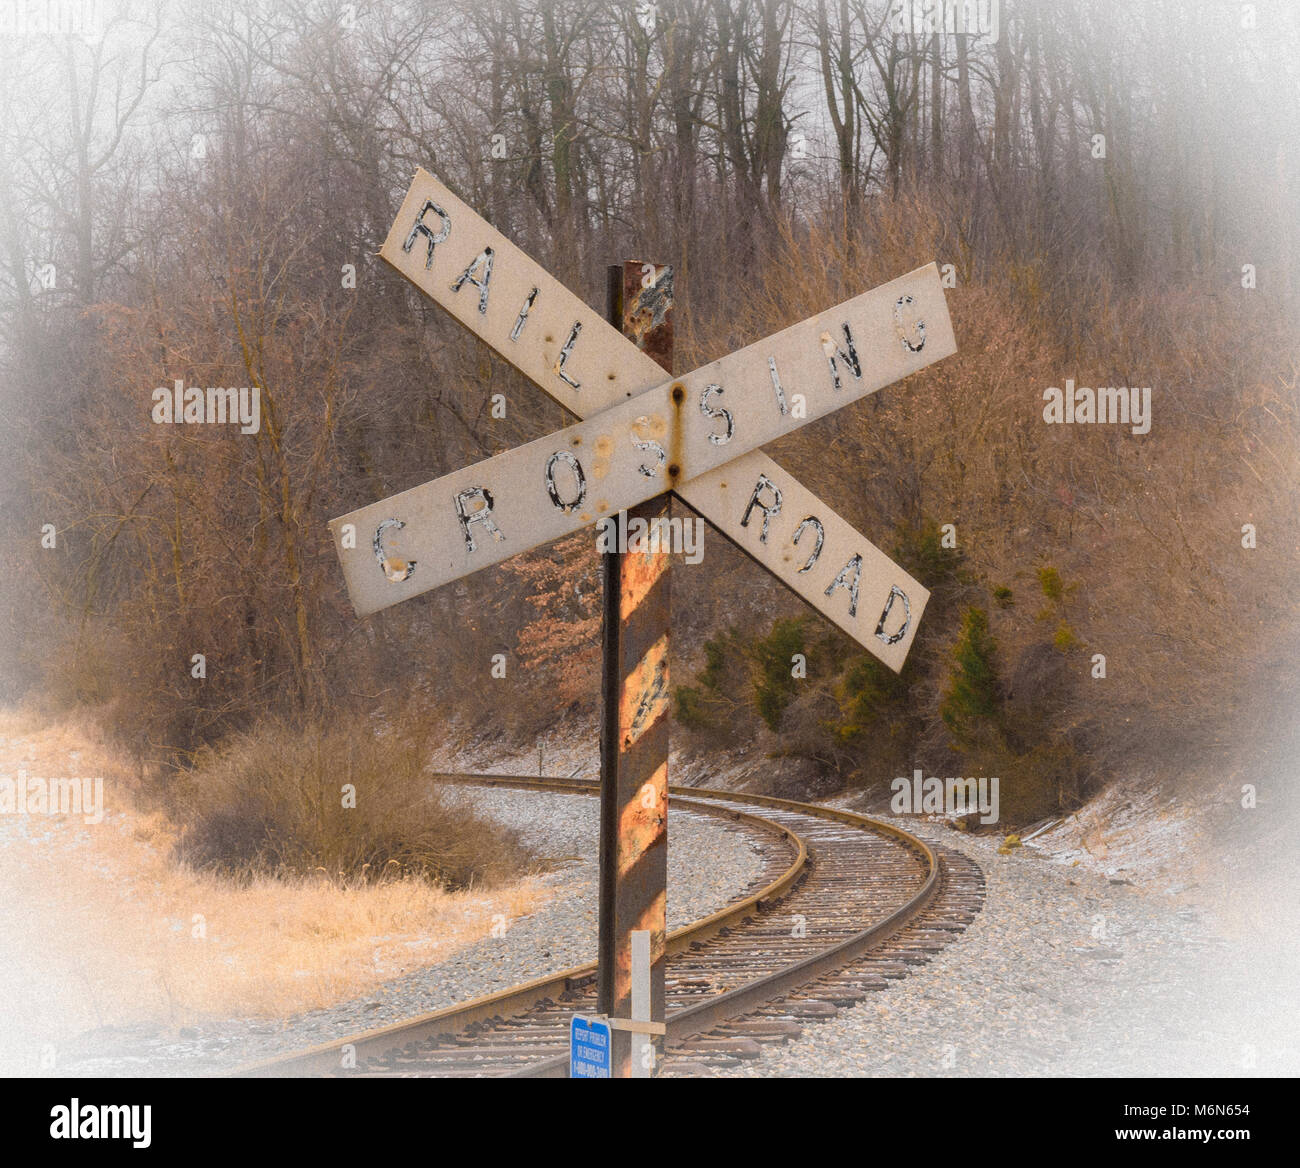 W10-3 Parallel Railroad Crossing (side road) Sign